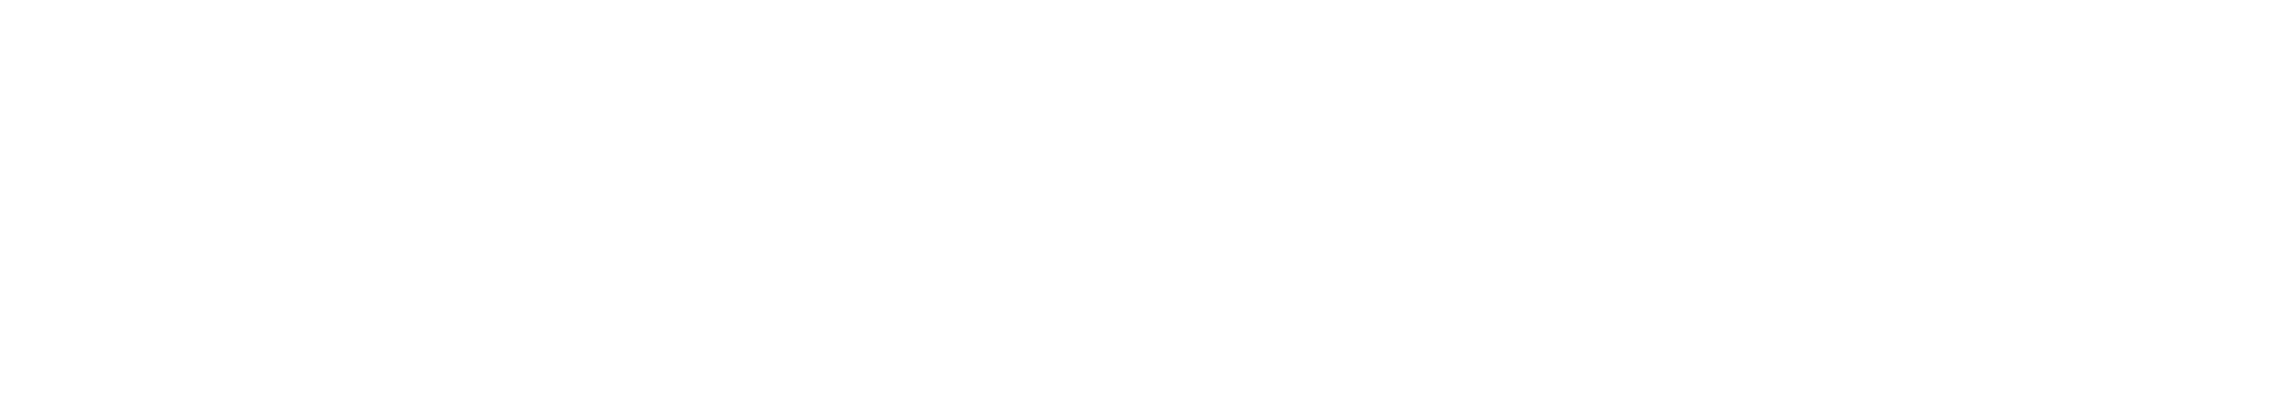 Star Tribune Logo - Police being forced to front lines of growing mental health crisis ...